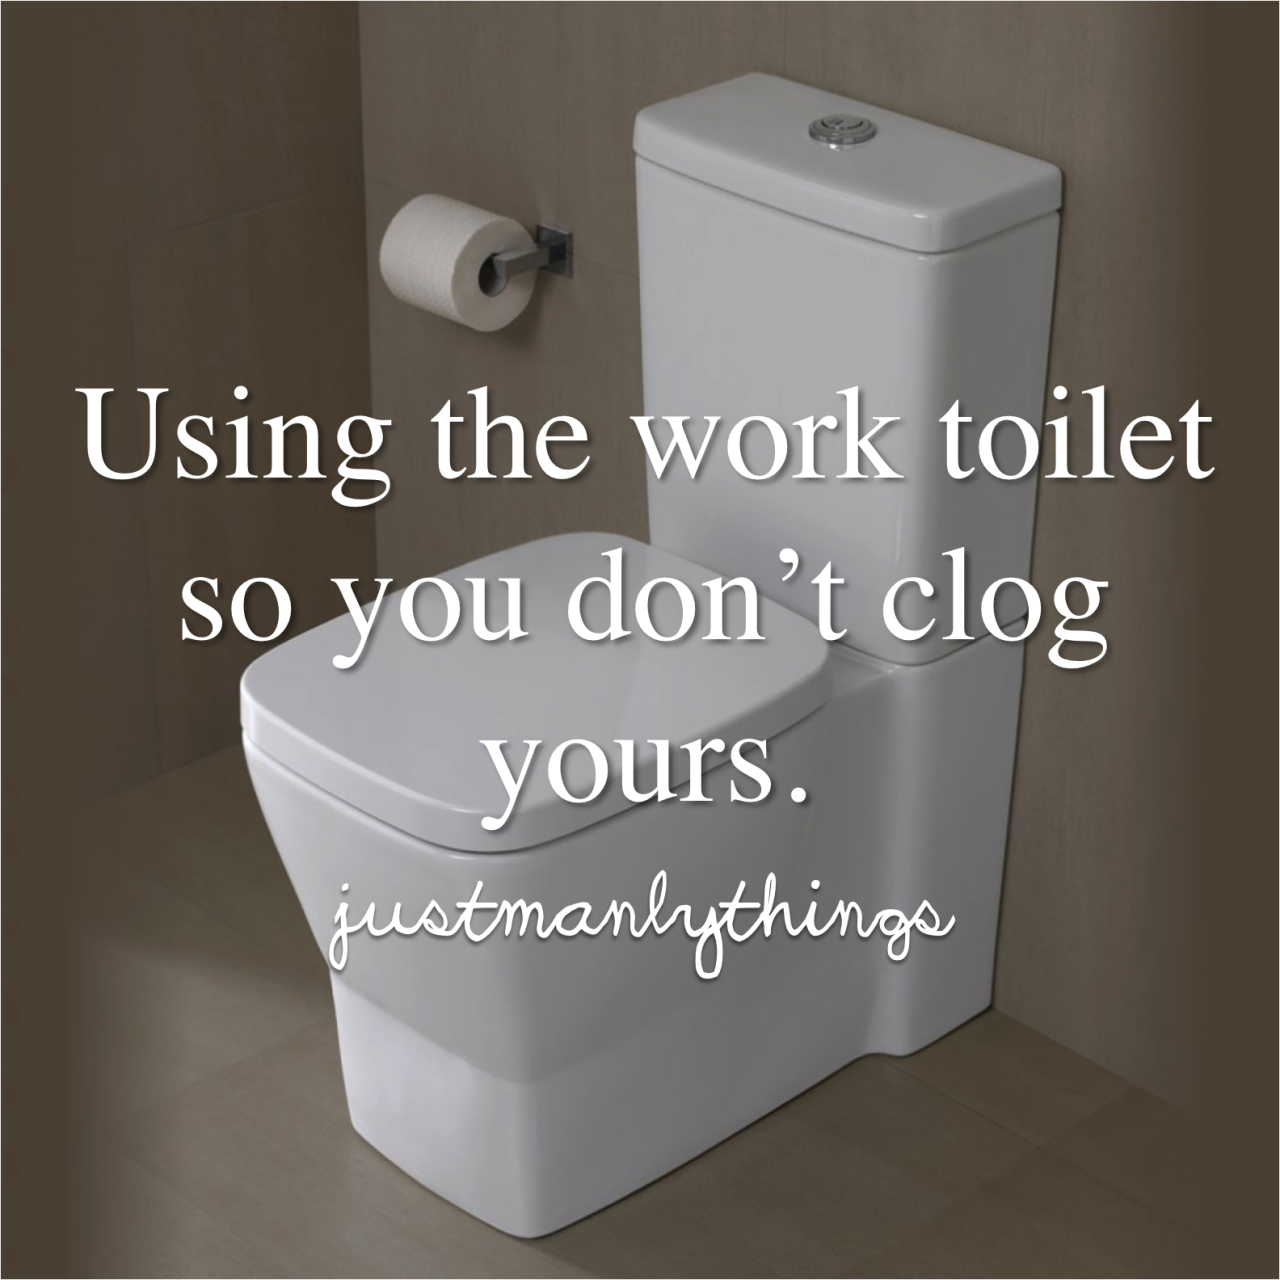 toilet seat - Using the work toilet so you don't clog yours. justmanly things